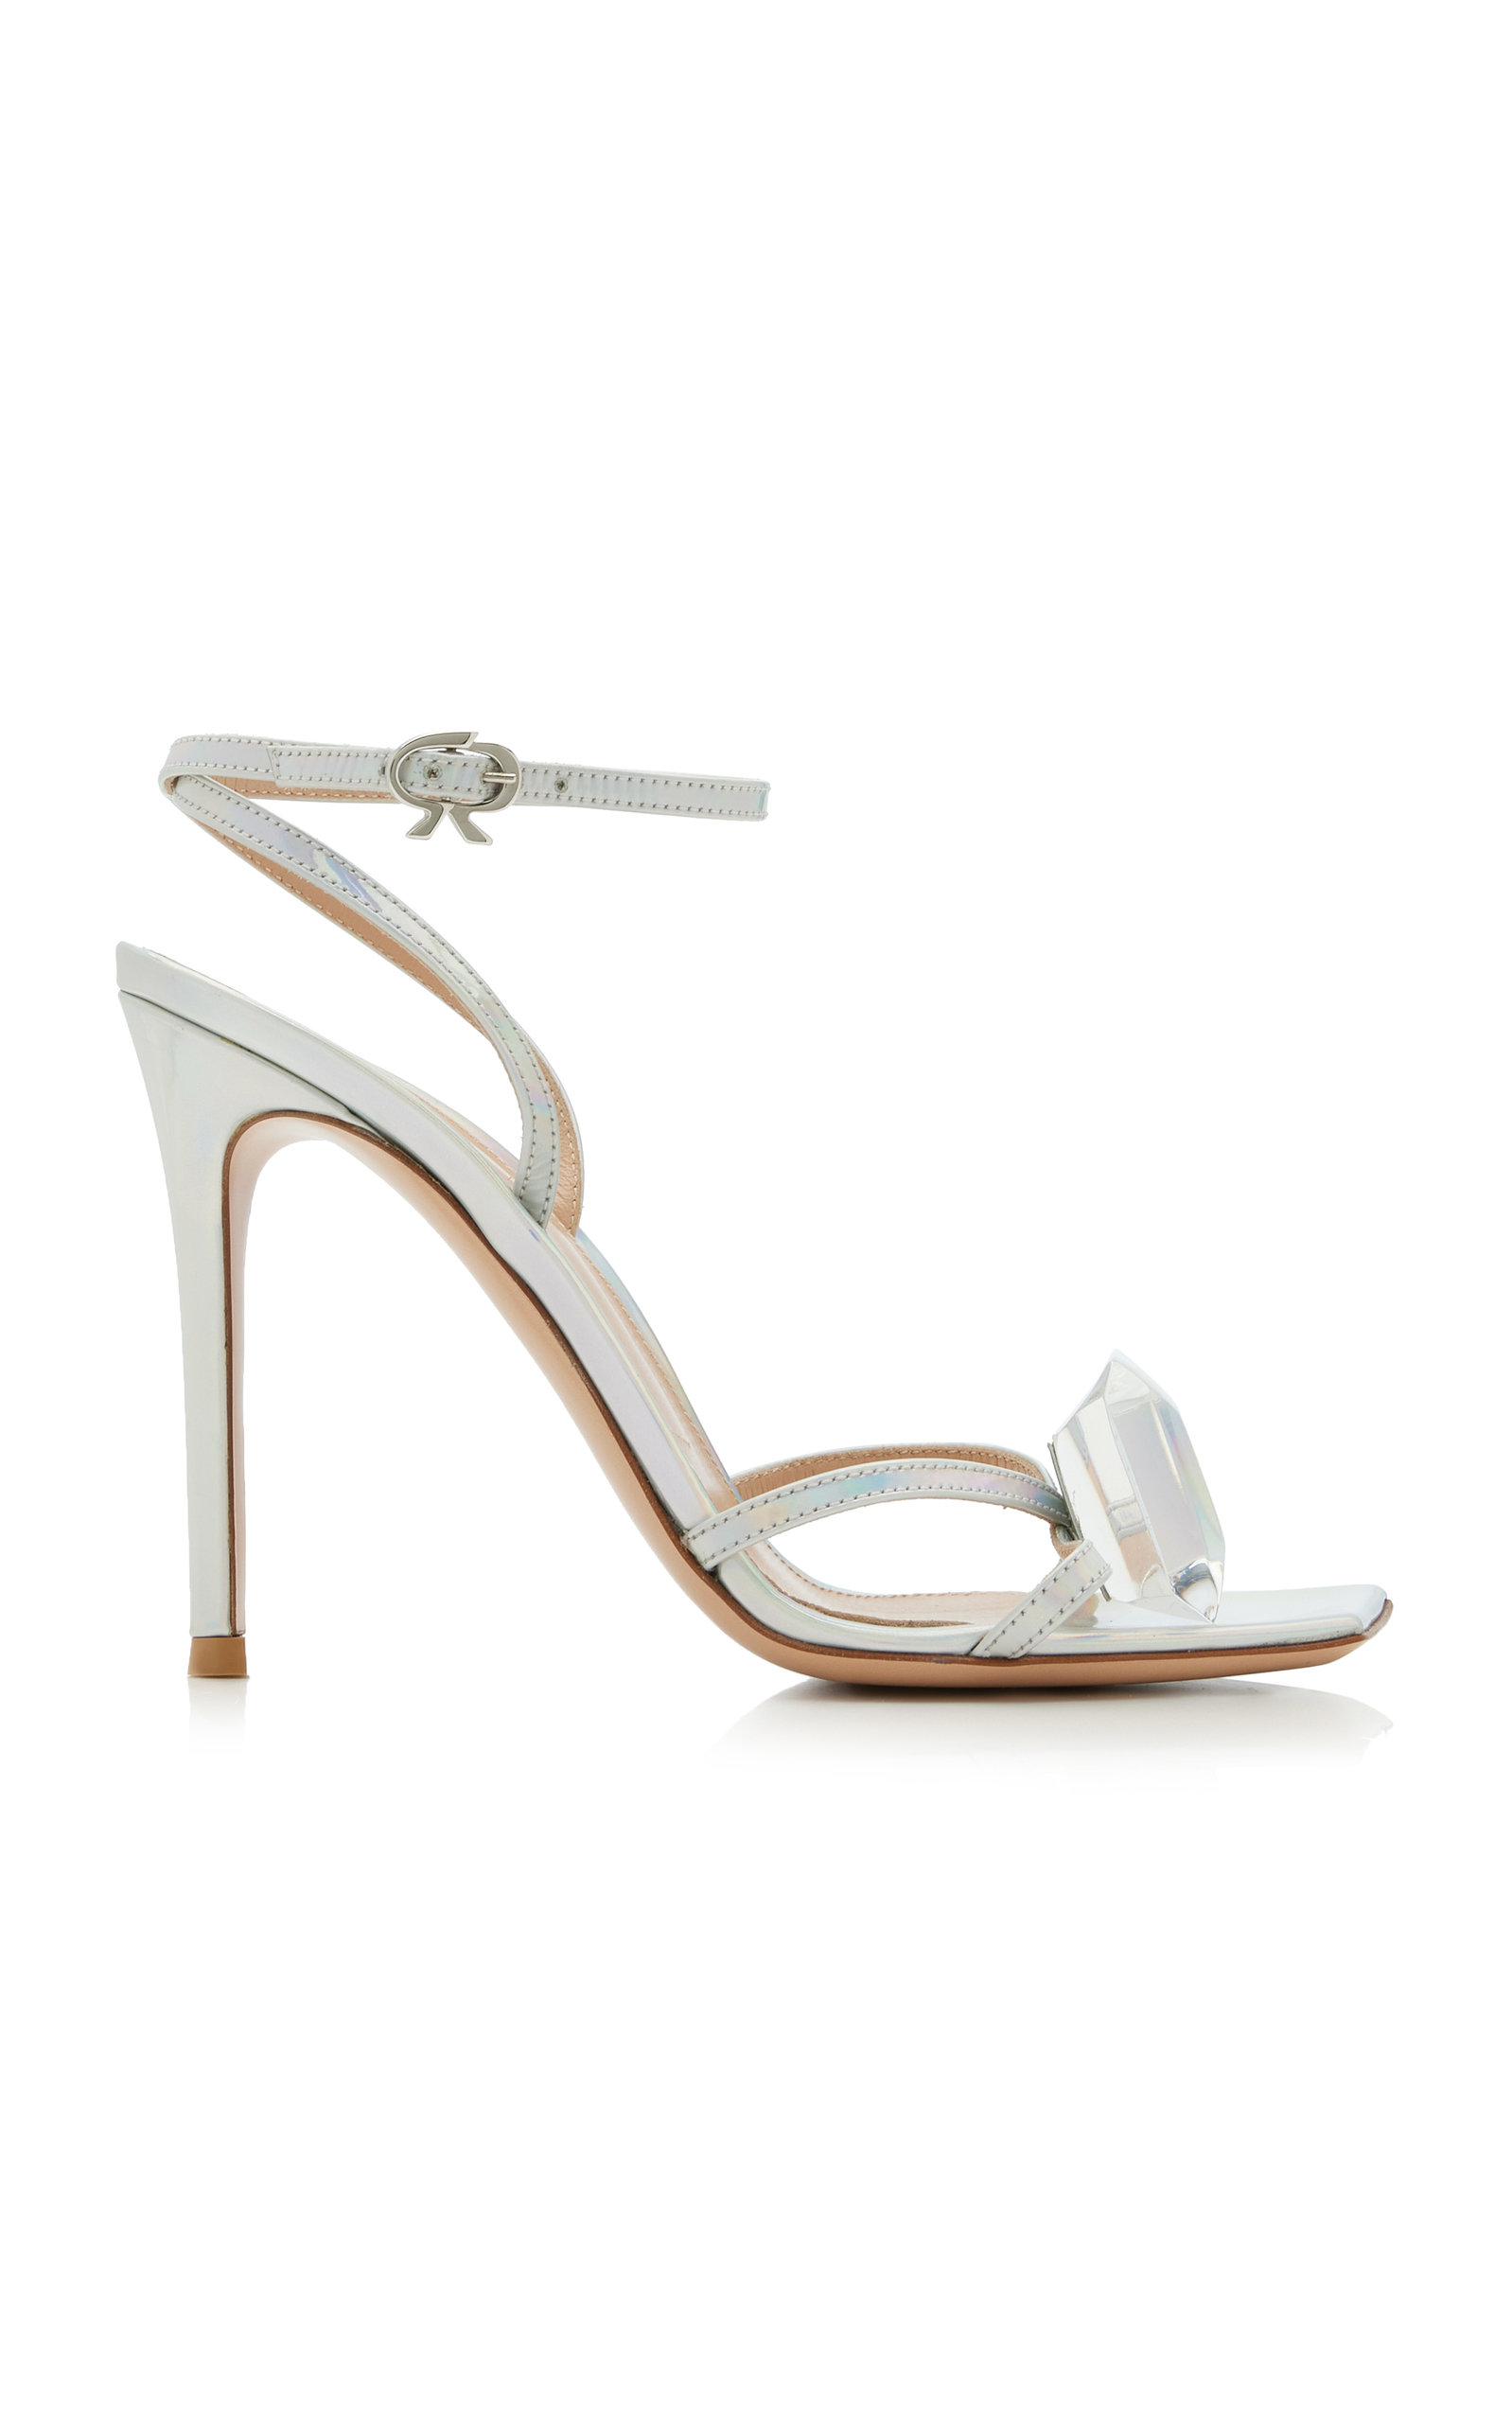 Gianvito Rossi Women's Jaipur Embellished Leather Sandals